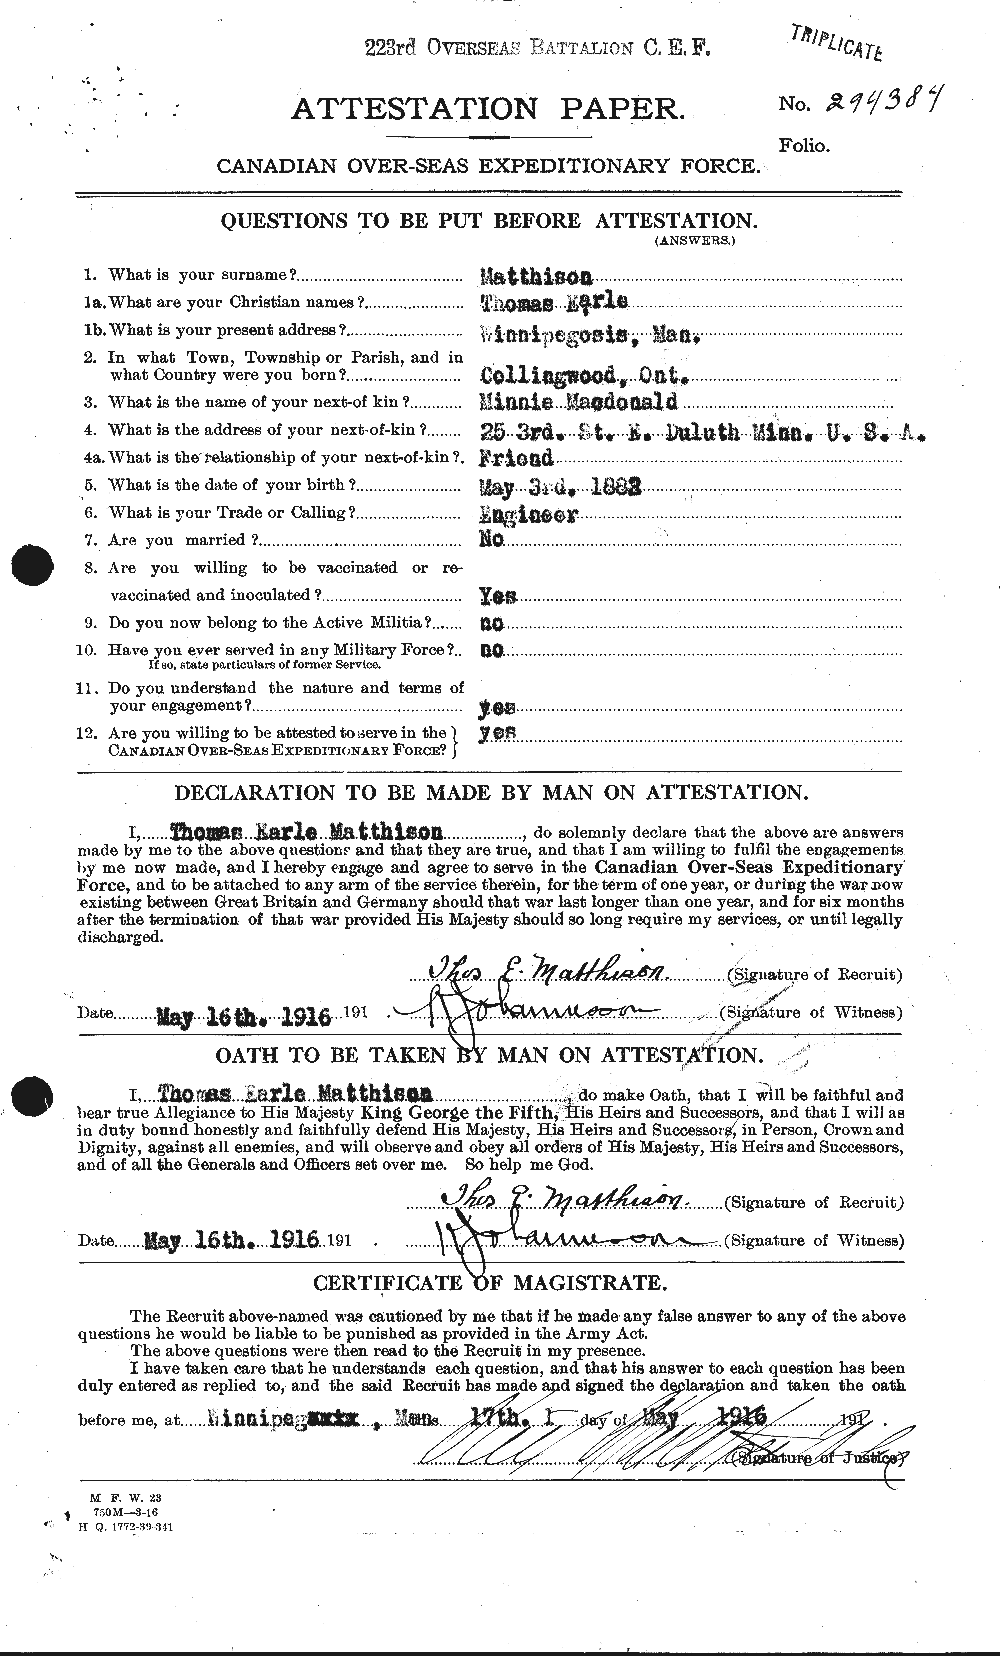 Personnel Records of the First World War - CEF 484078a